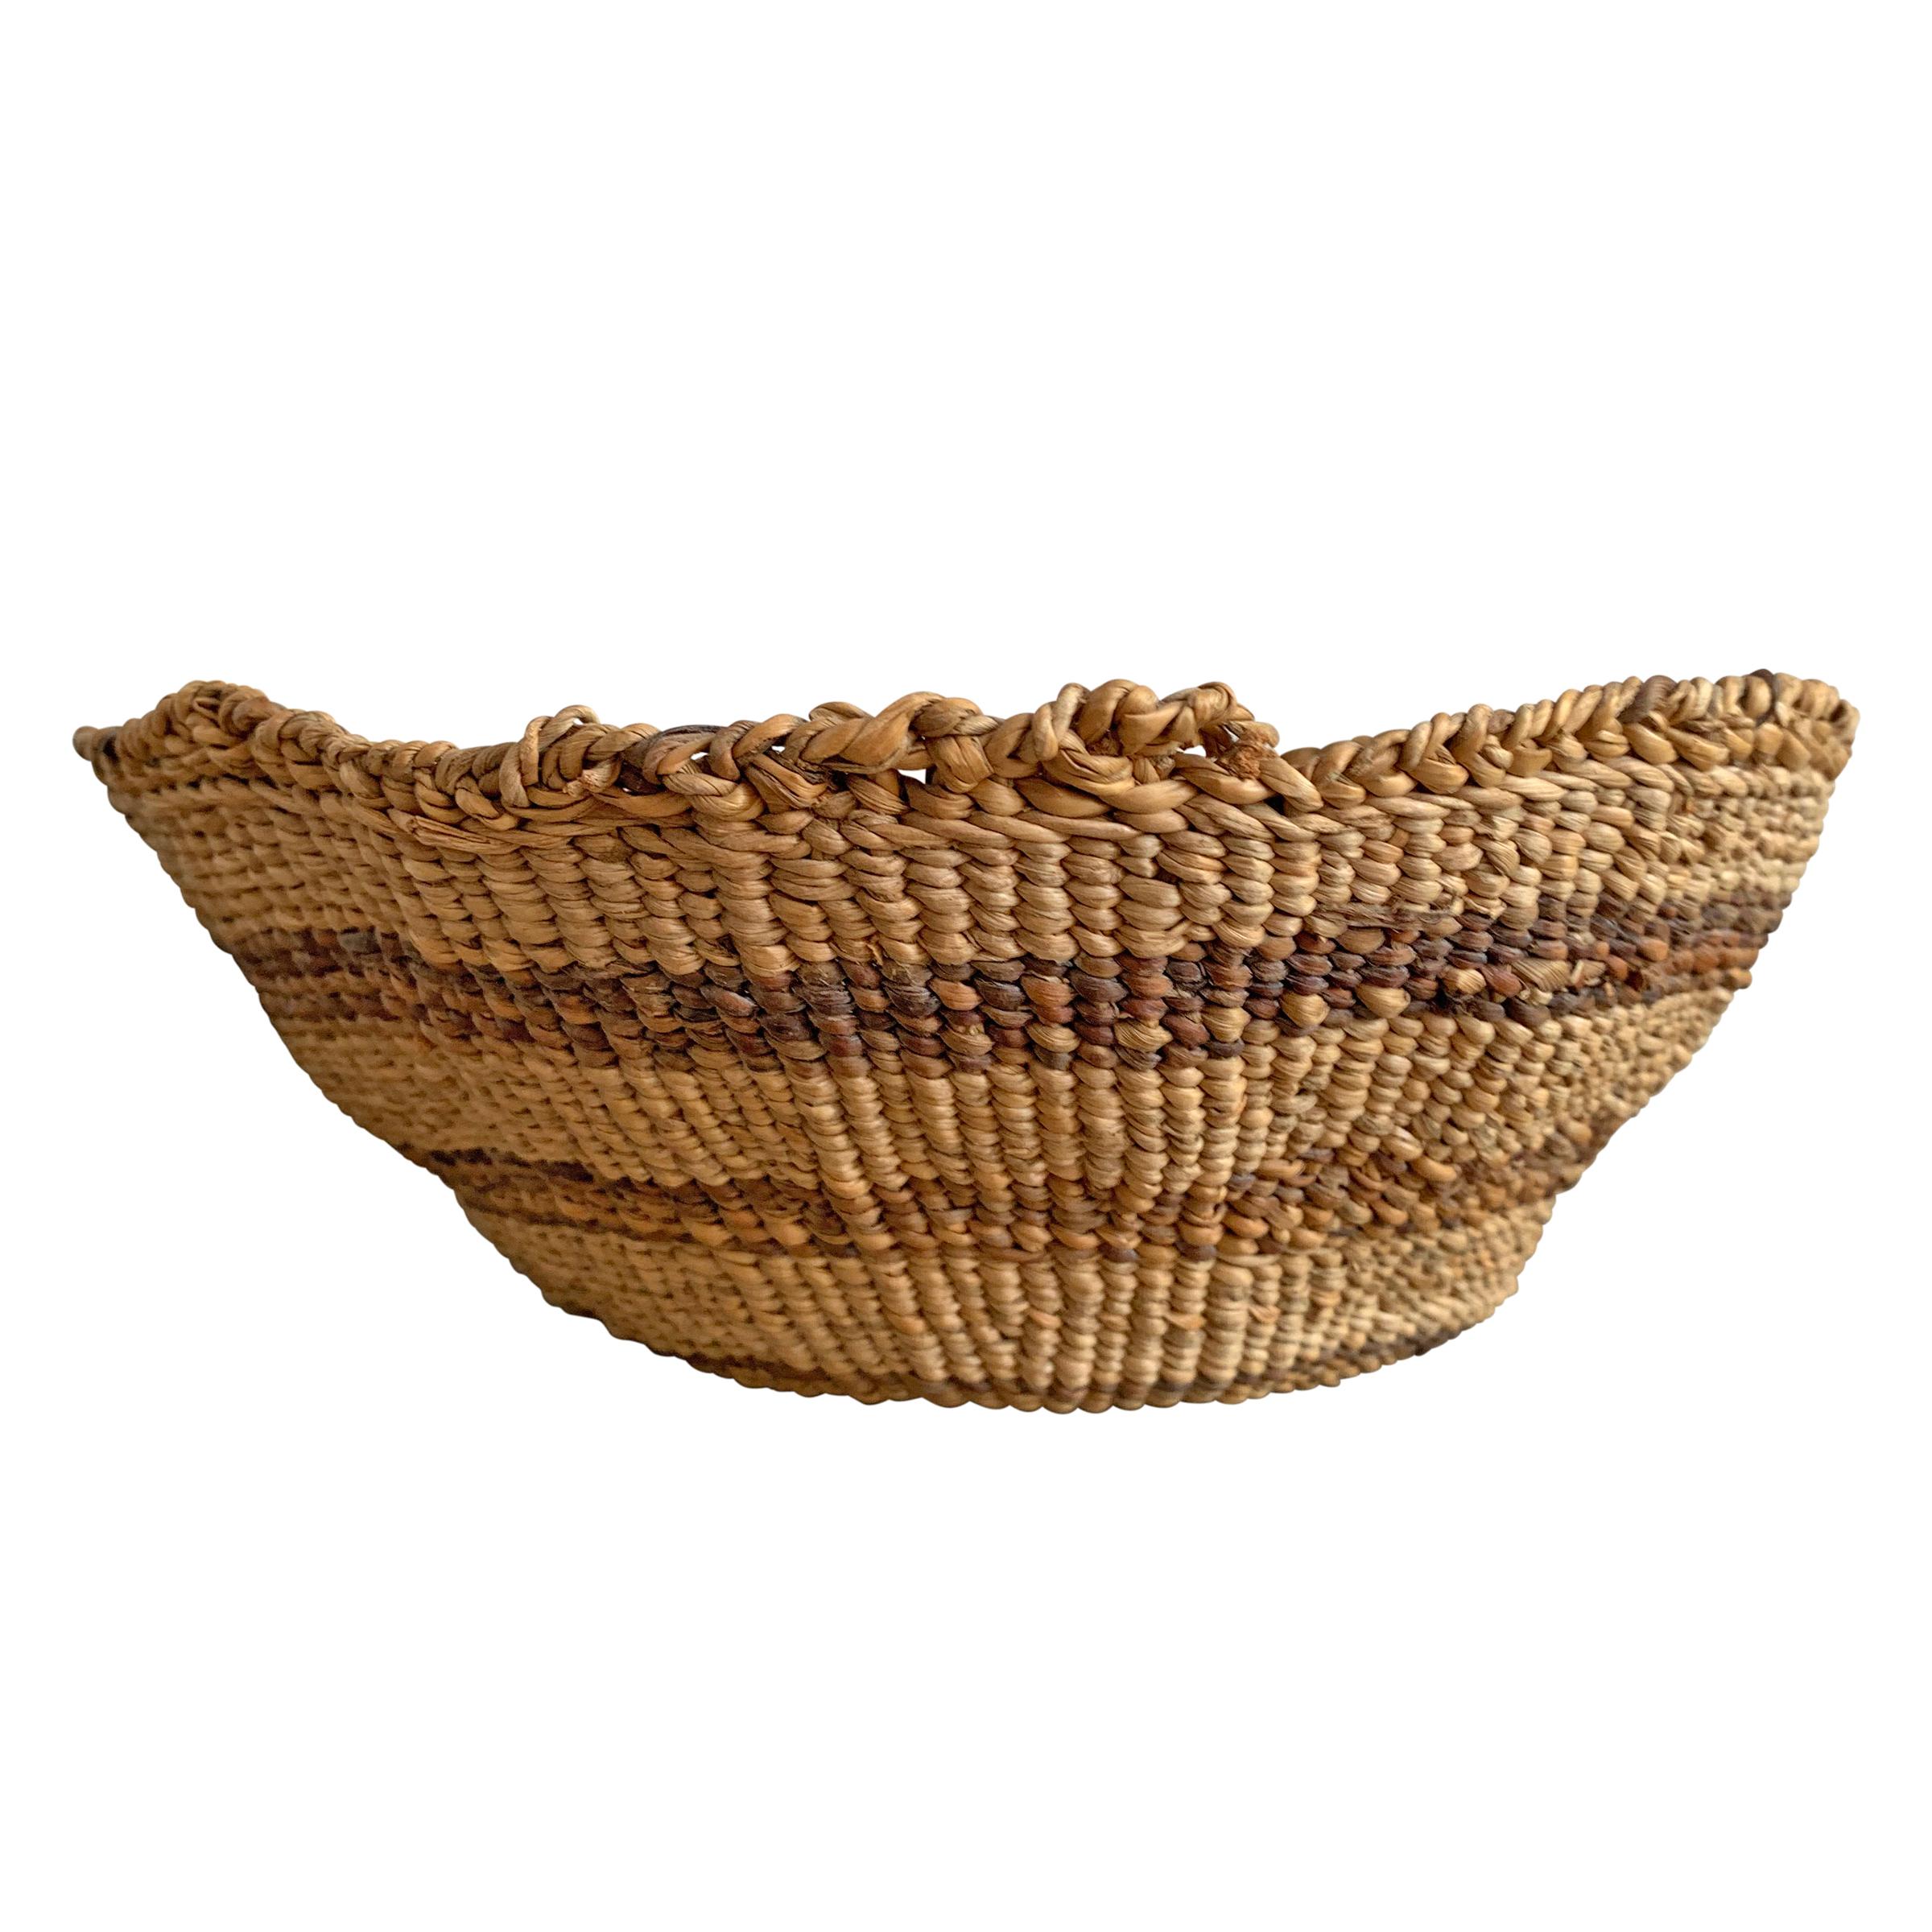 Early 20th Century Pacific NW Native American Basket 3